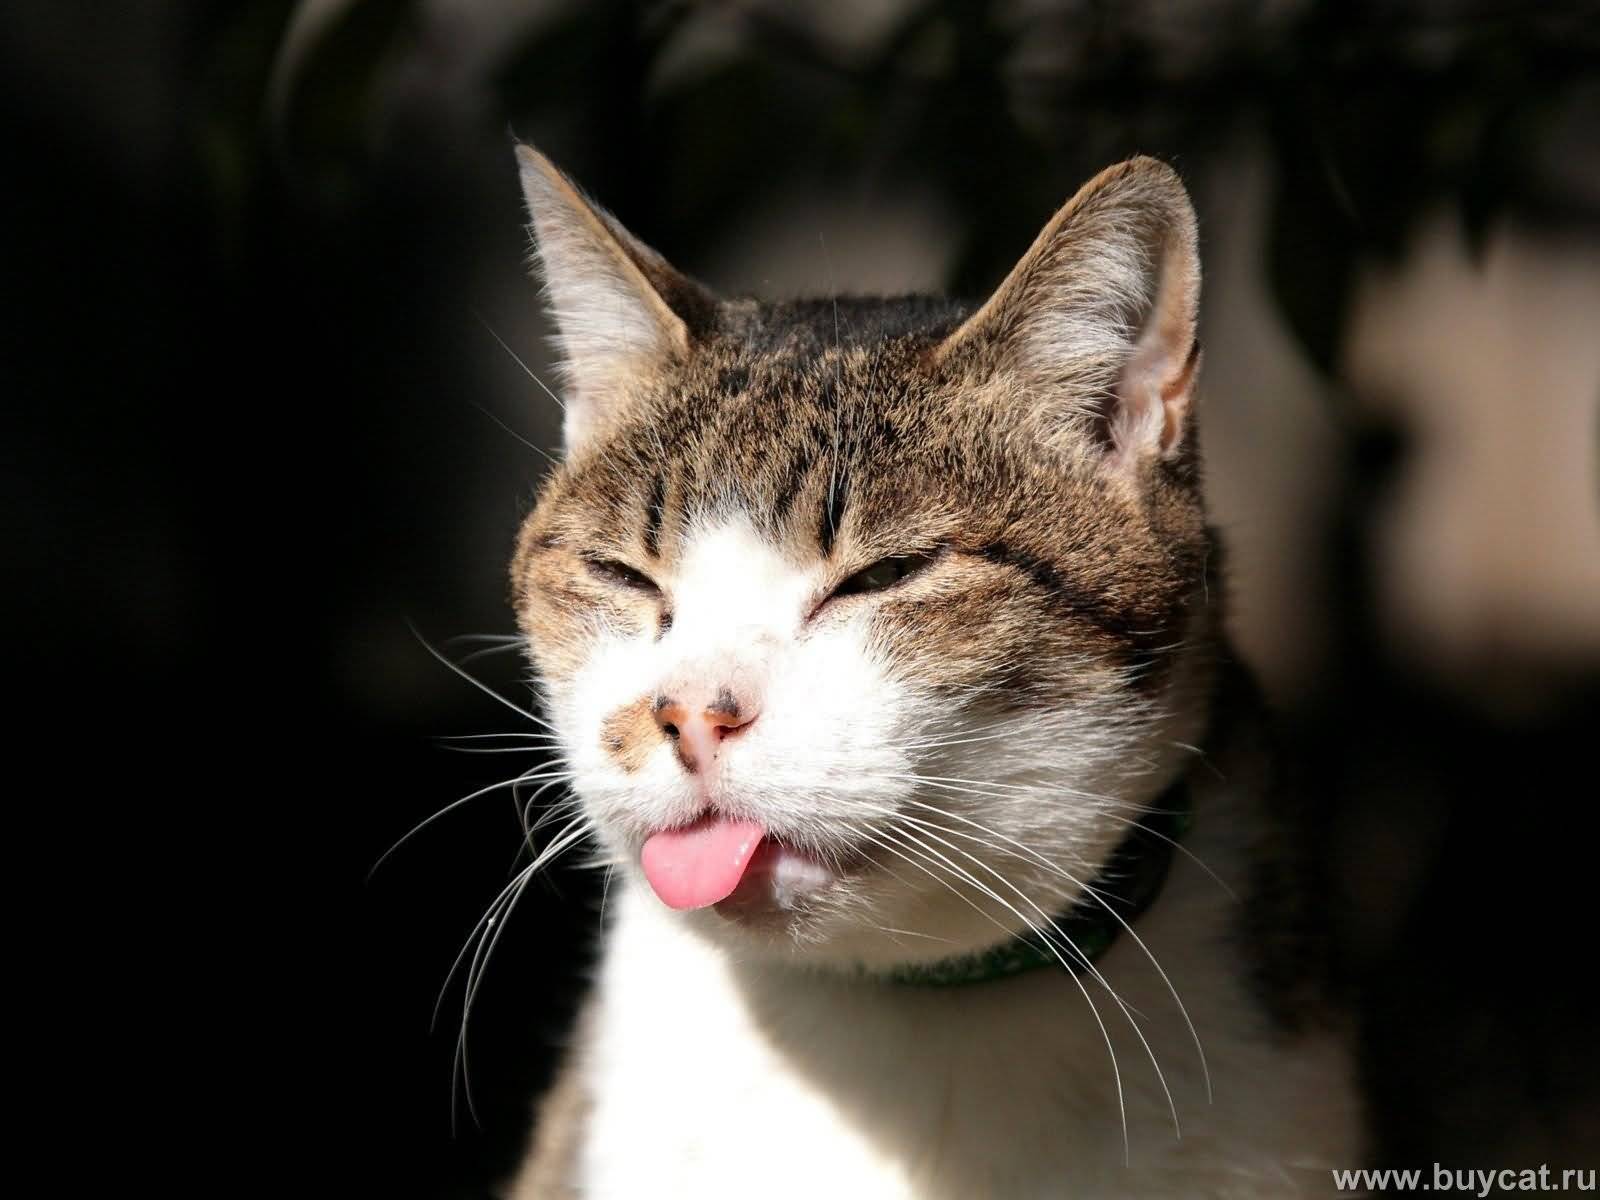 Funny Cat Showing Tongue